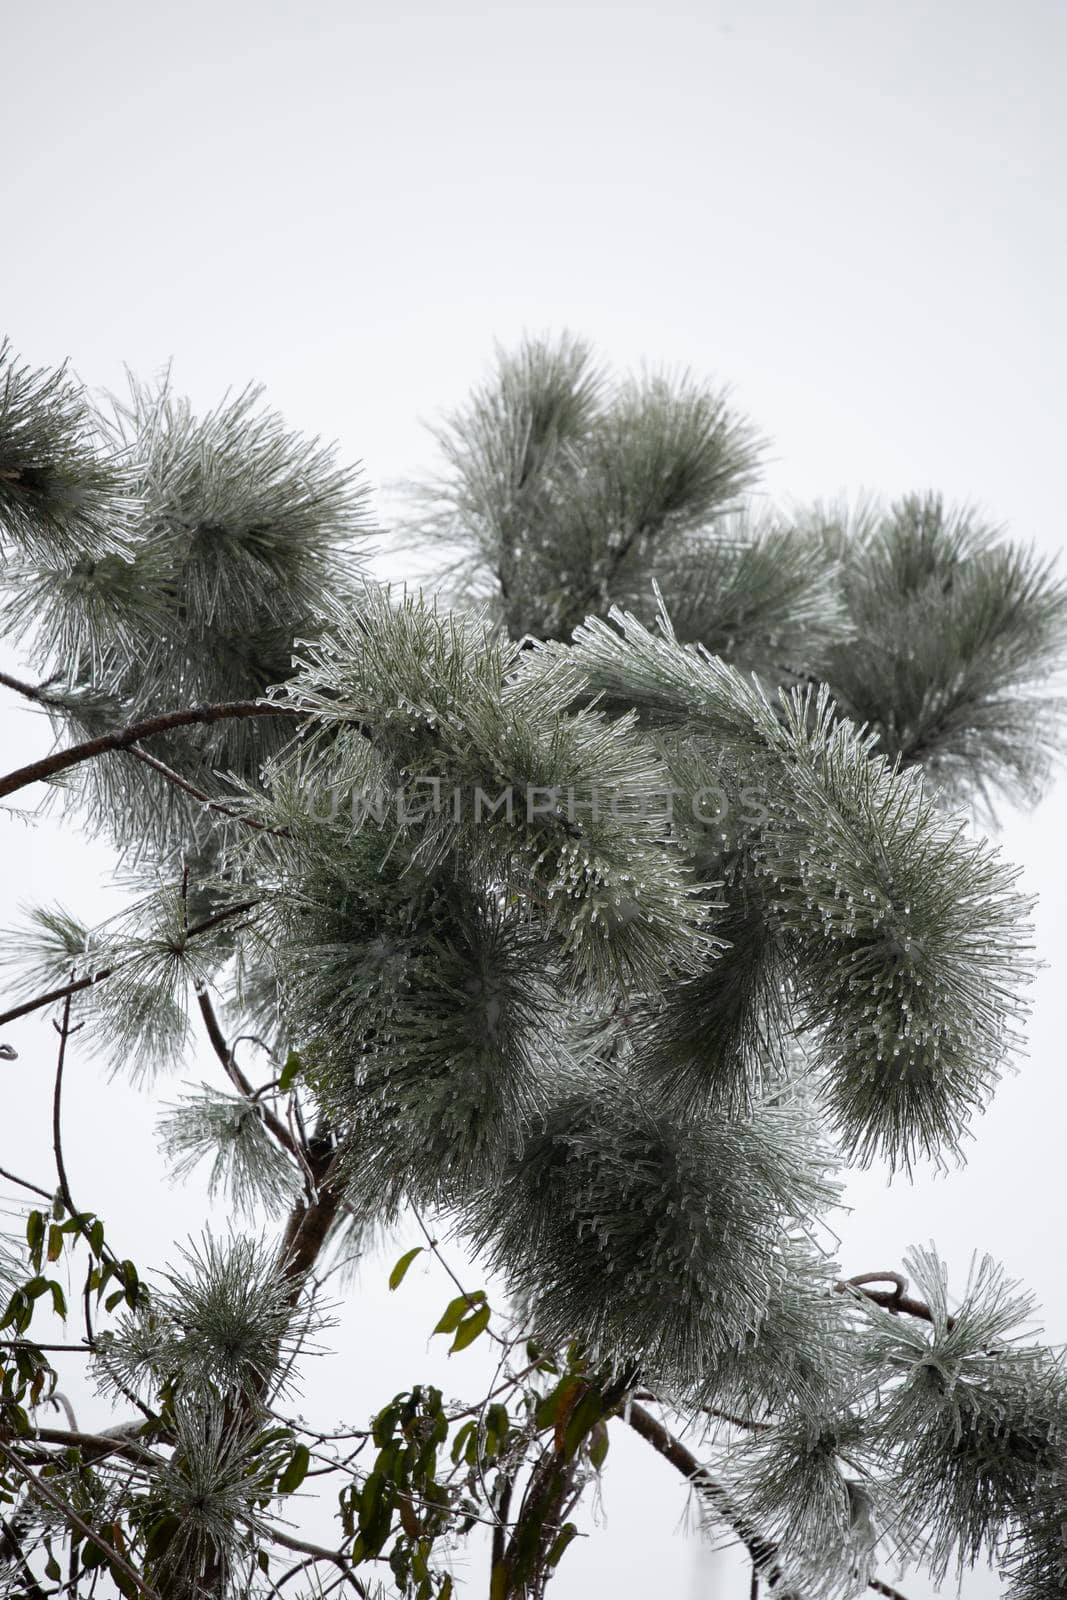 Ice on the needles of a pine tree